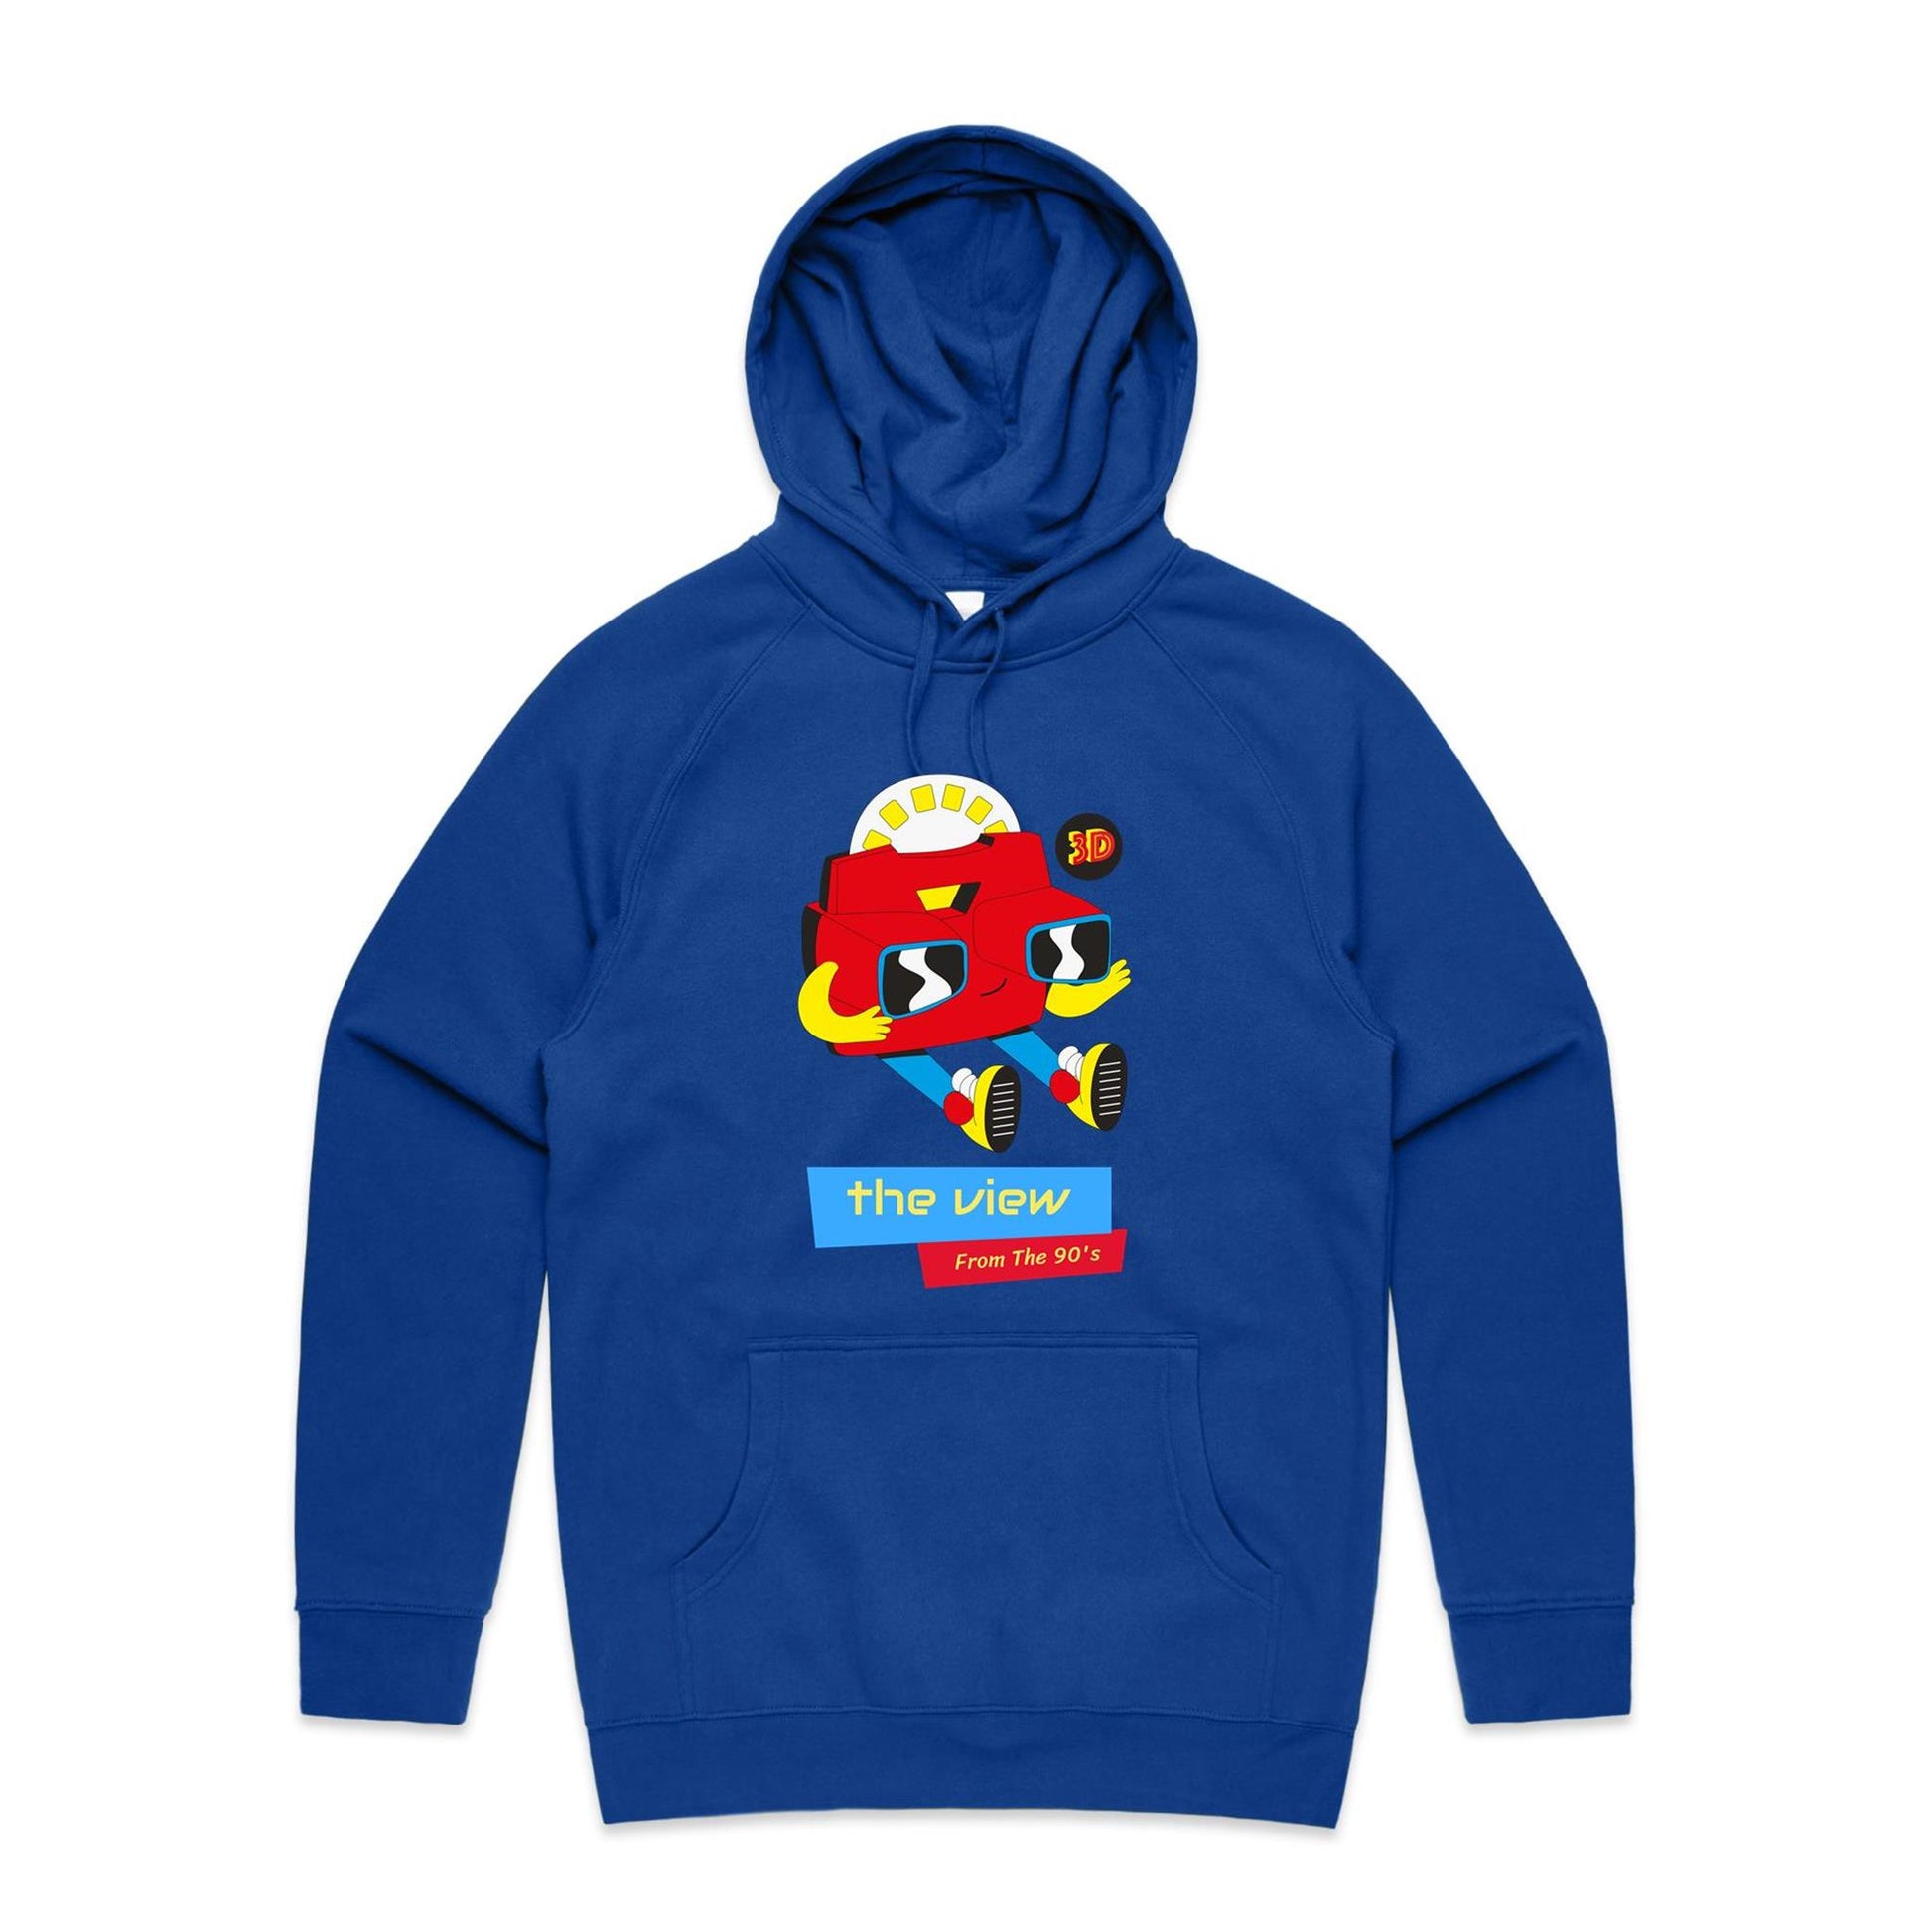 The View From The 90's - Supply Hood Bright Royal Mens Supply Hoodie Retro